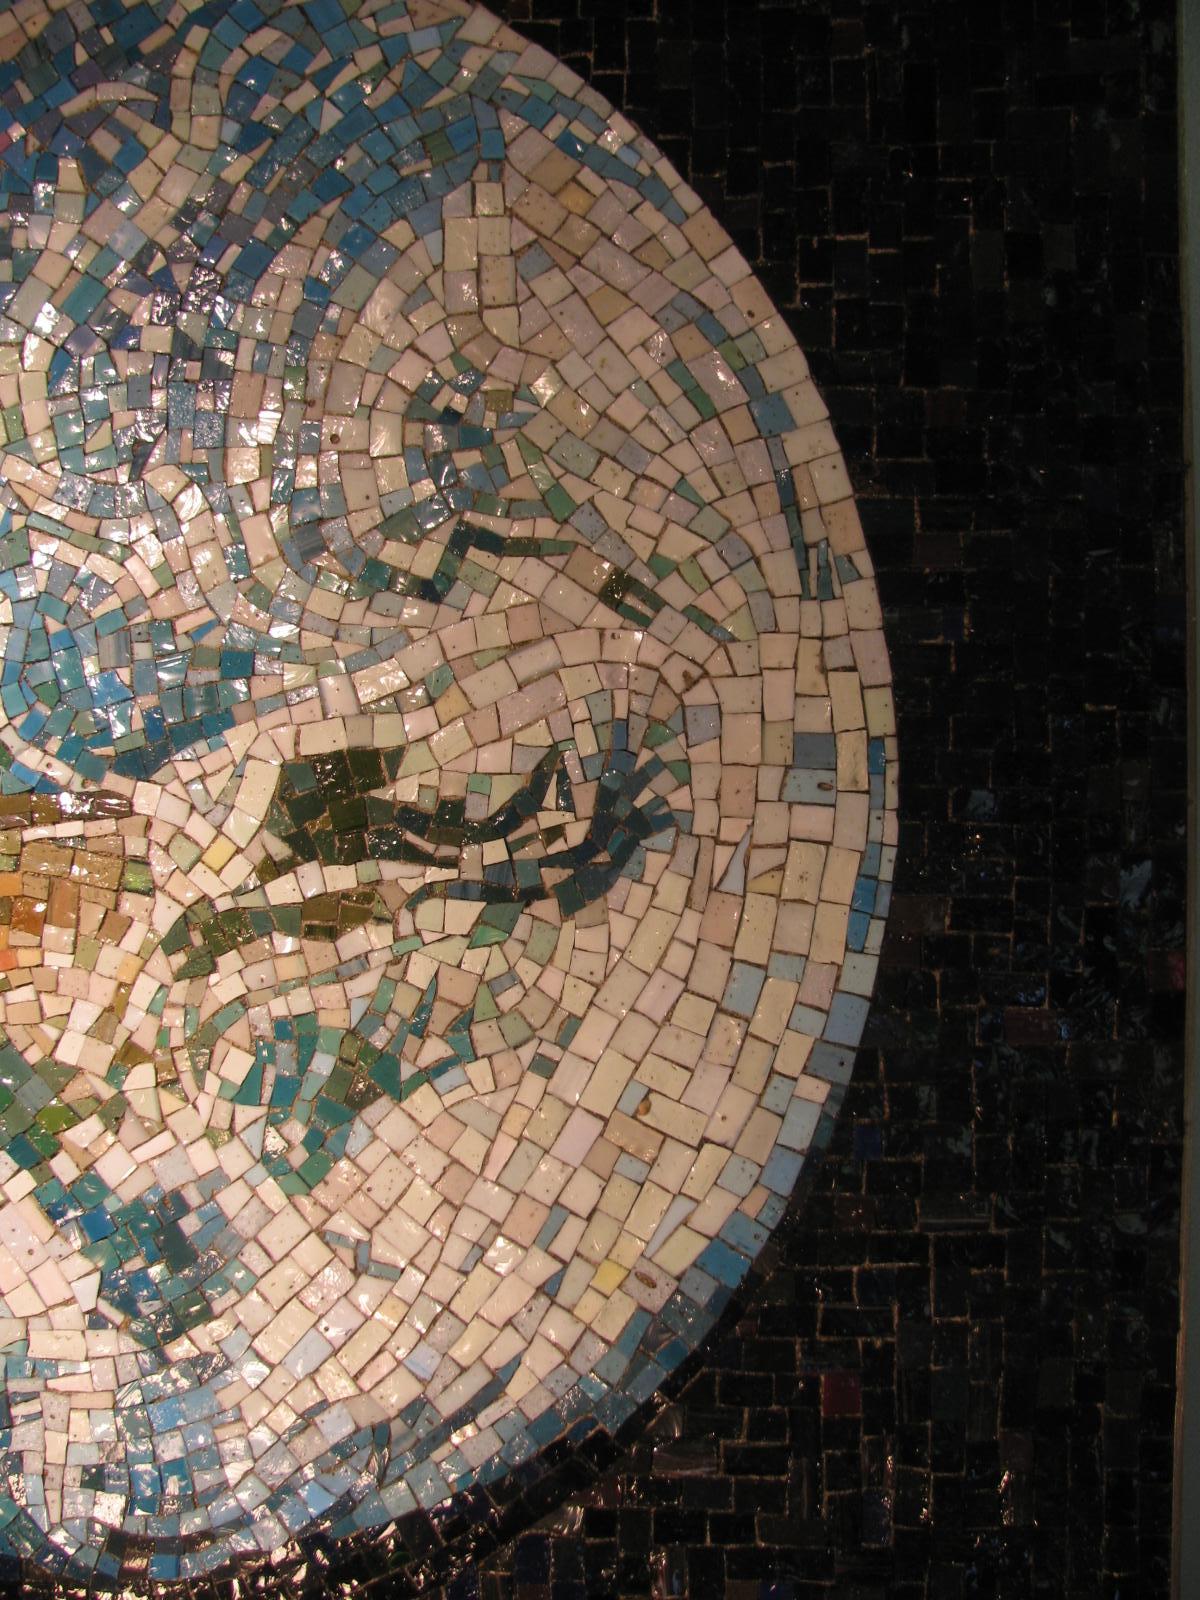 Ceramic Mid-Century Modern Tile Mosaic View of Earth From Space